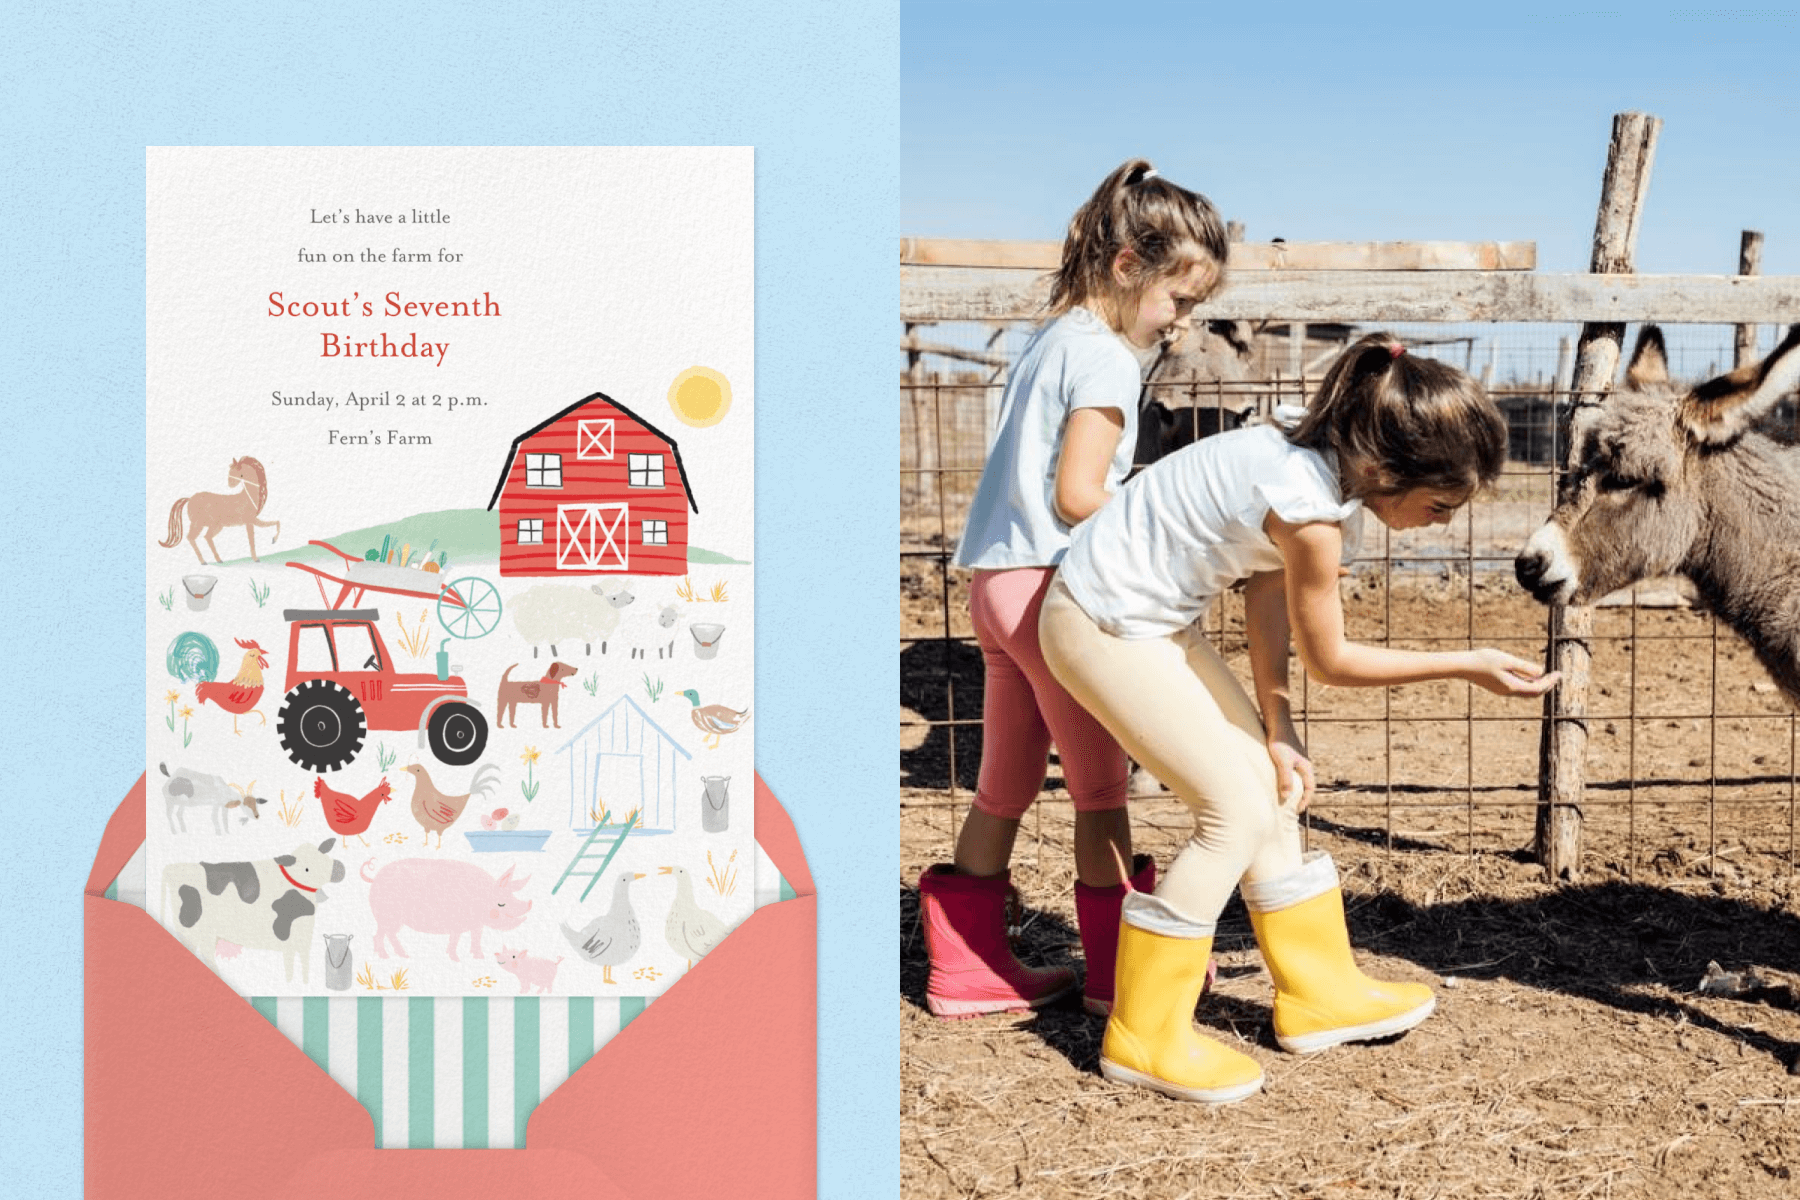 An invitation shows farm animals and a red barn; two young girls feed a small donkey on a farm.